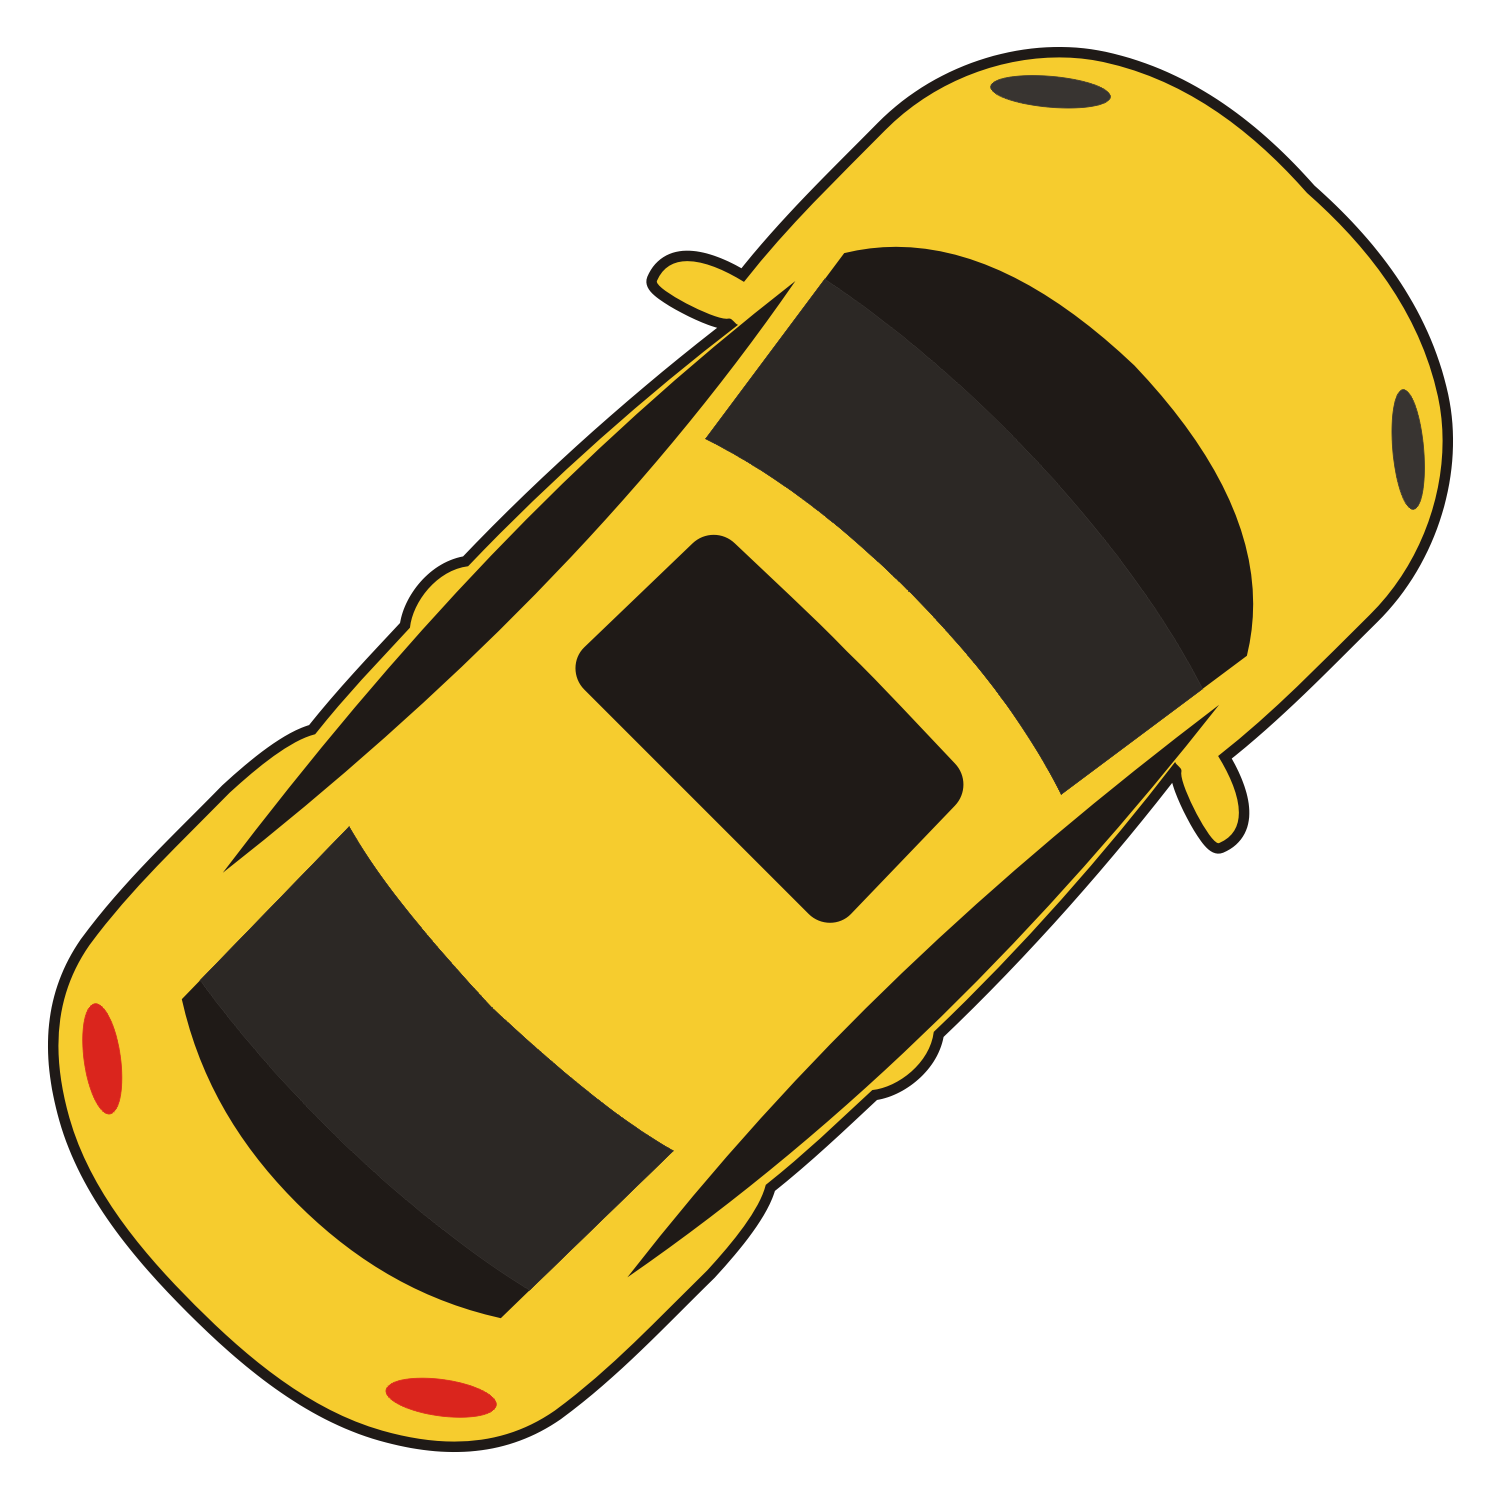 Car Top View   Clipart Panda   Free Clipart Images